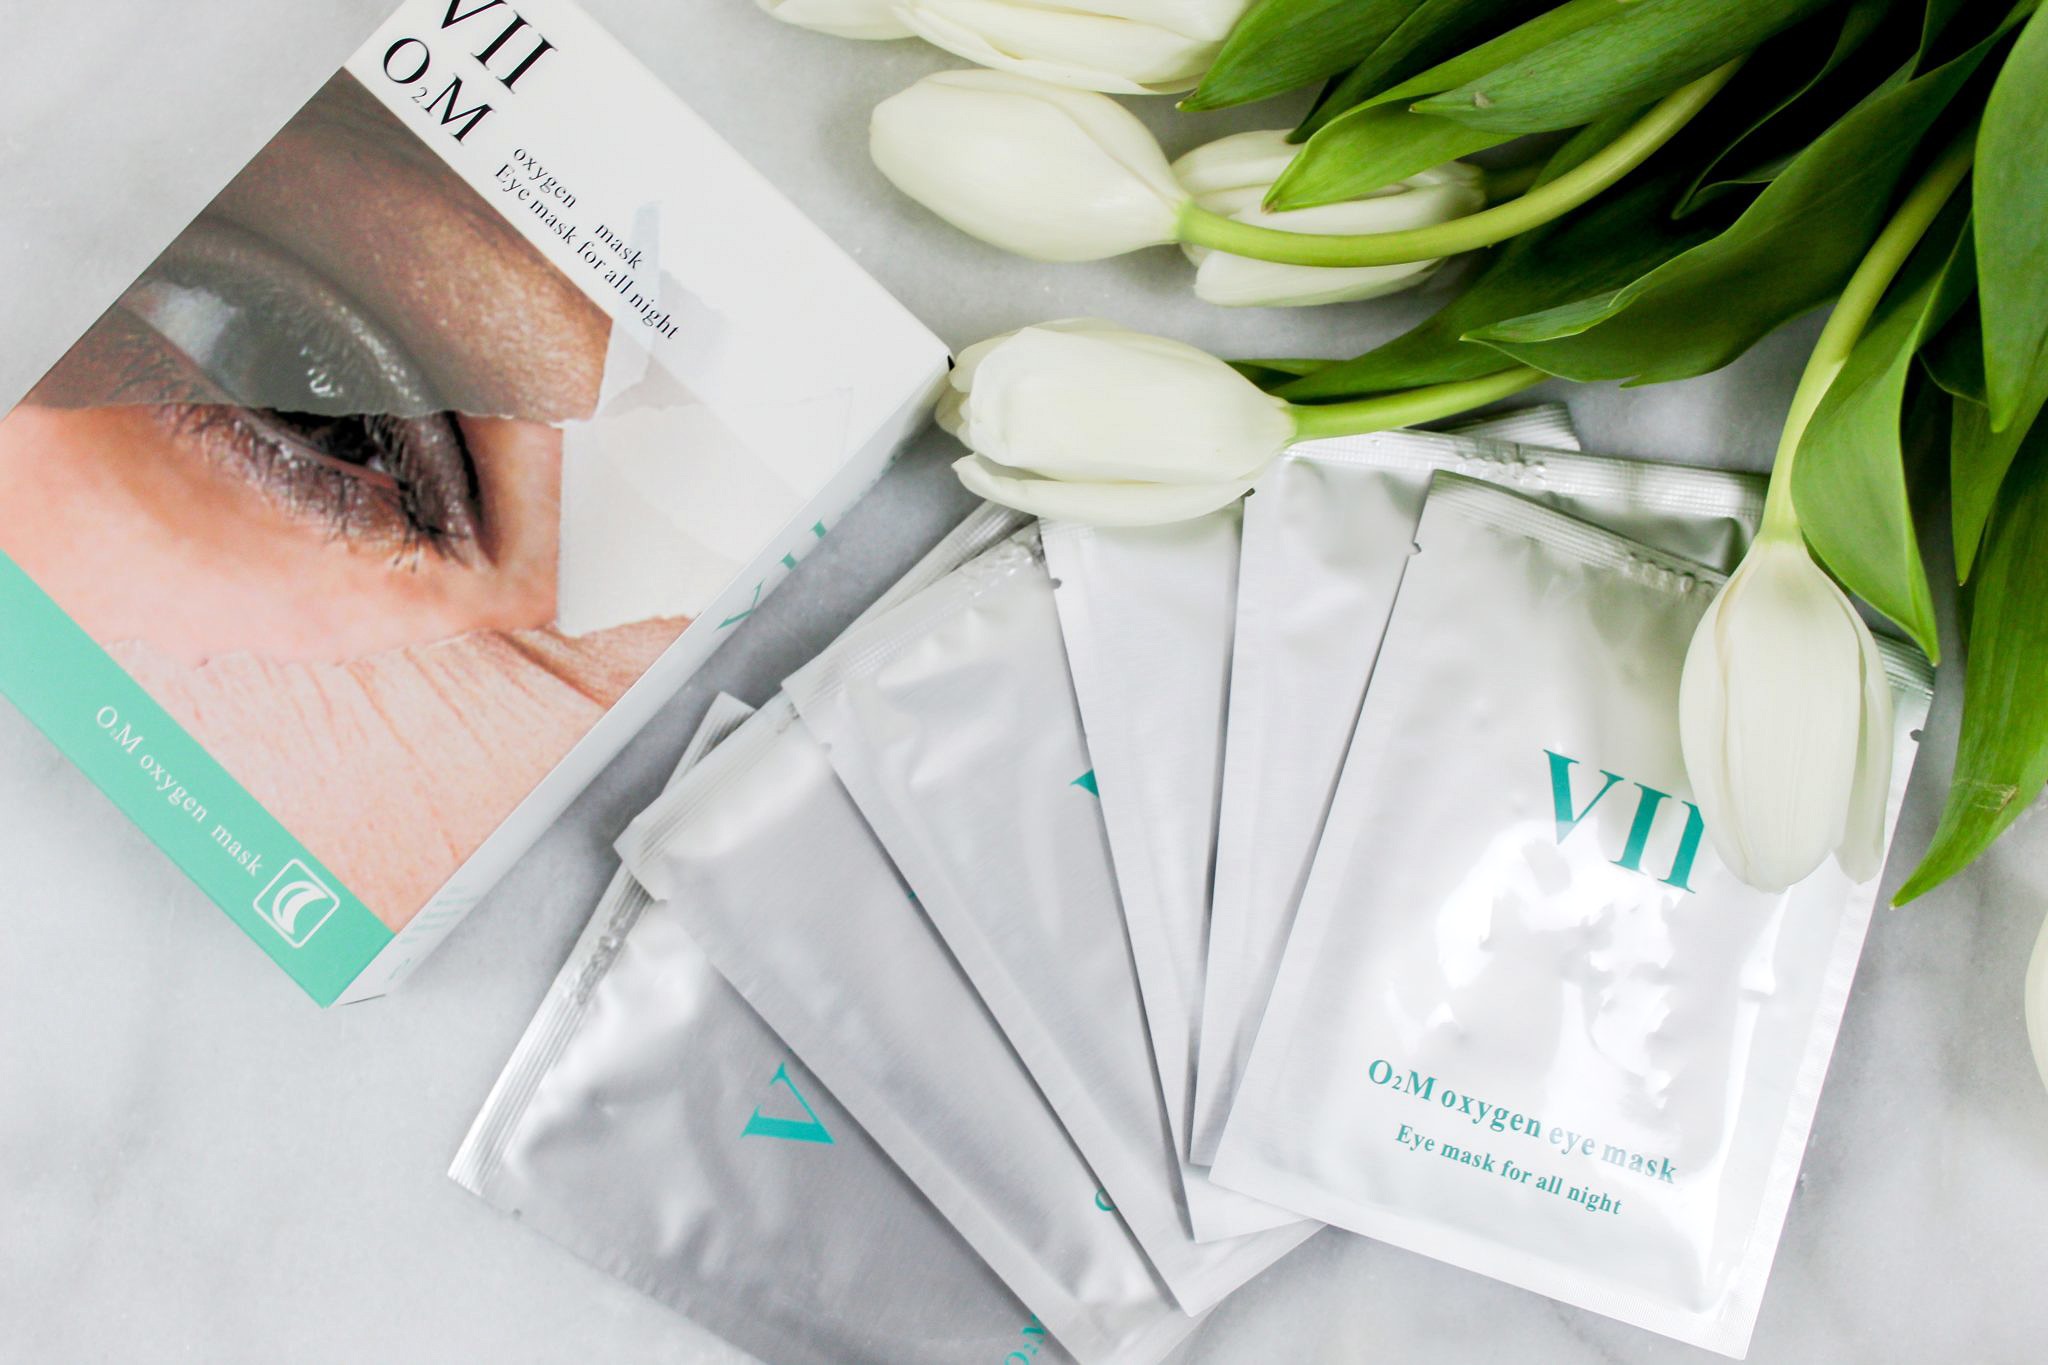 Debbie Savage of To Thine Own Style Be True's Review of VIIcode Oxygen Eye Mask for Dark Circles